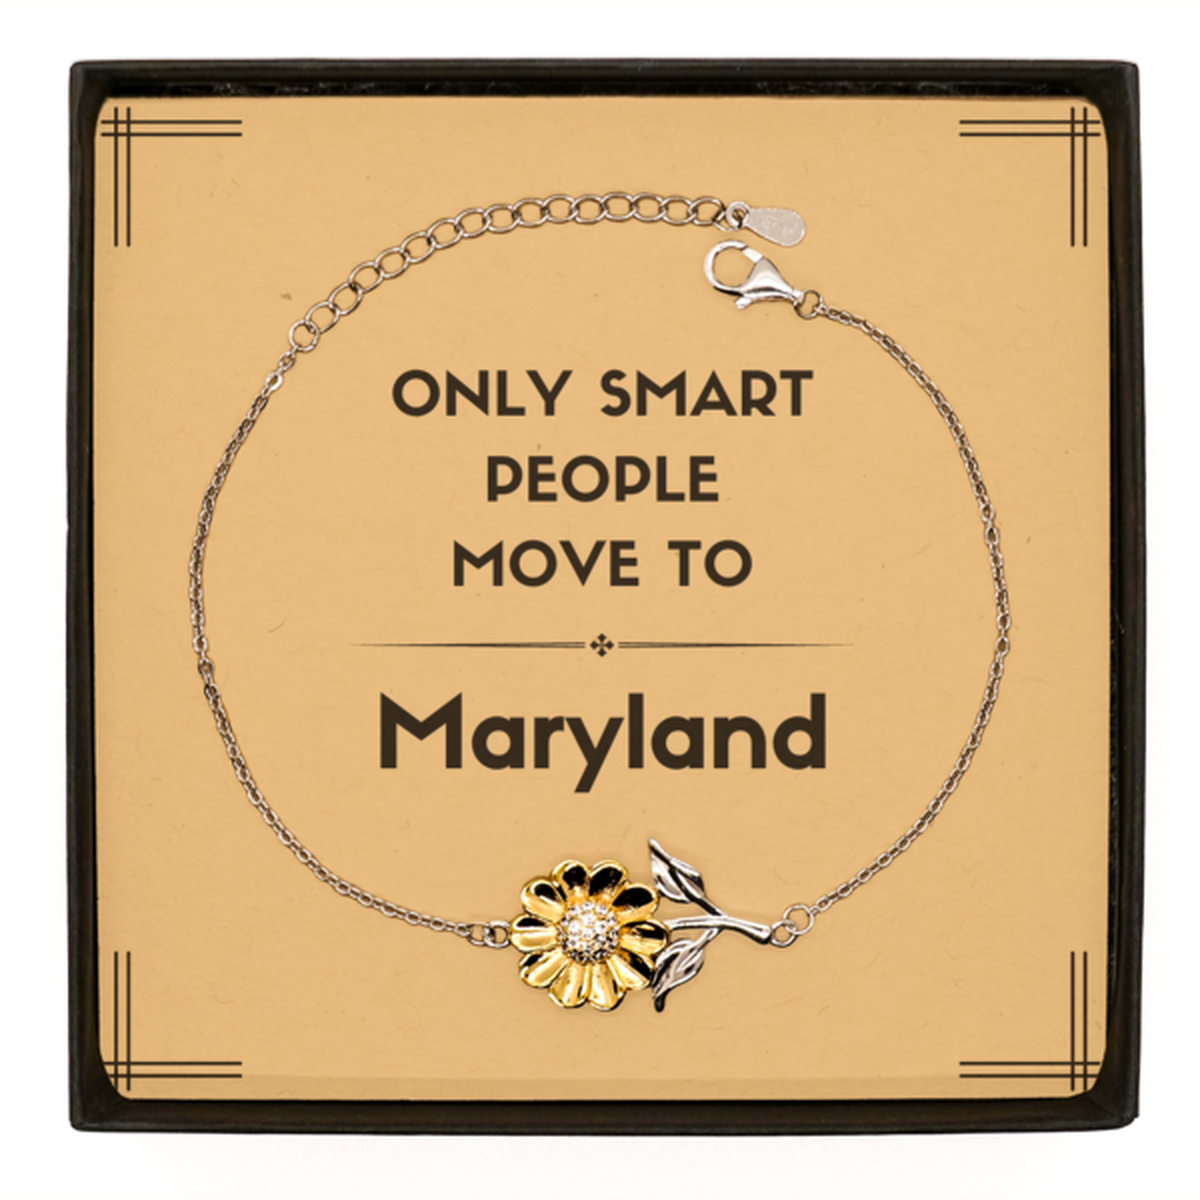 Only smart people move to Maryland Sunflower Bracelet, Message Card Gifts For Maryland, Move to Maryland Gifts for Friends Coworker Funny Saying Quote